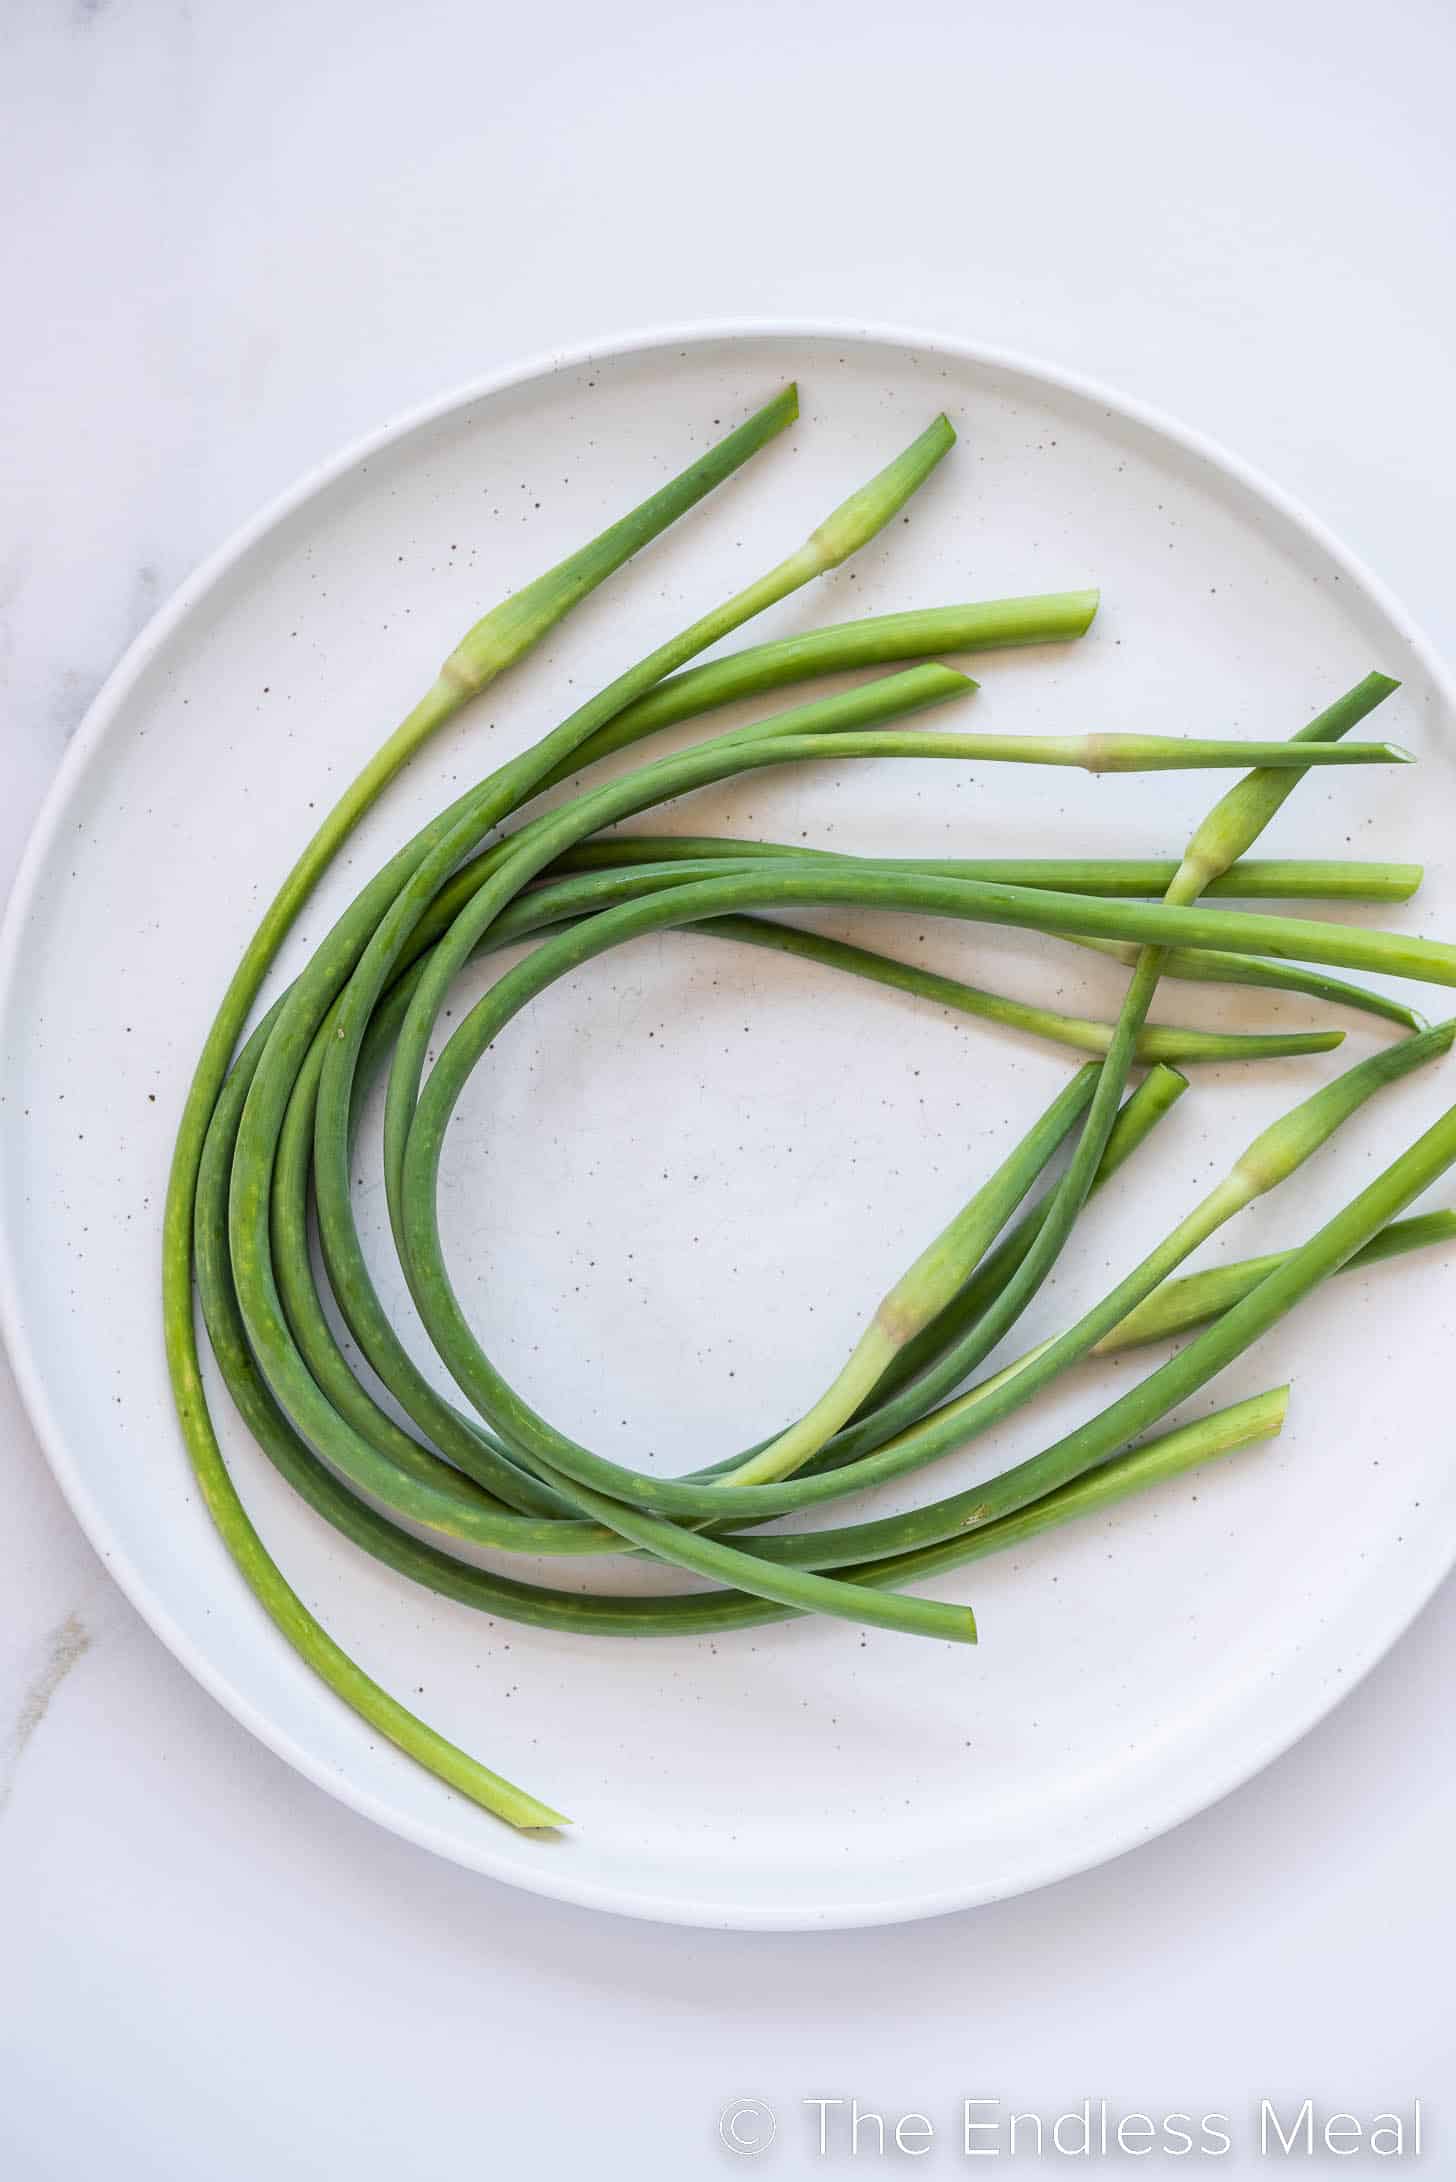 Garlic Scapes curled up on a plate